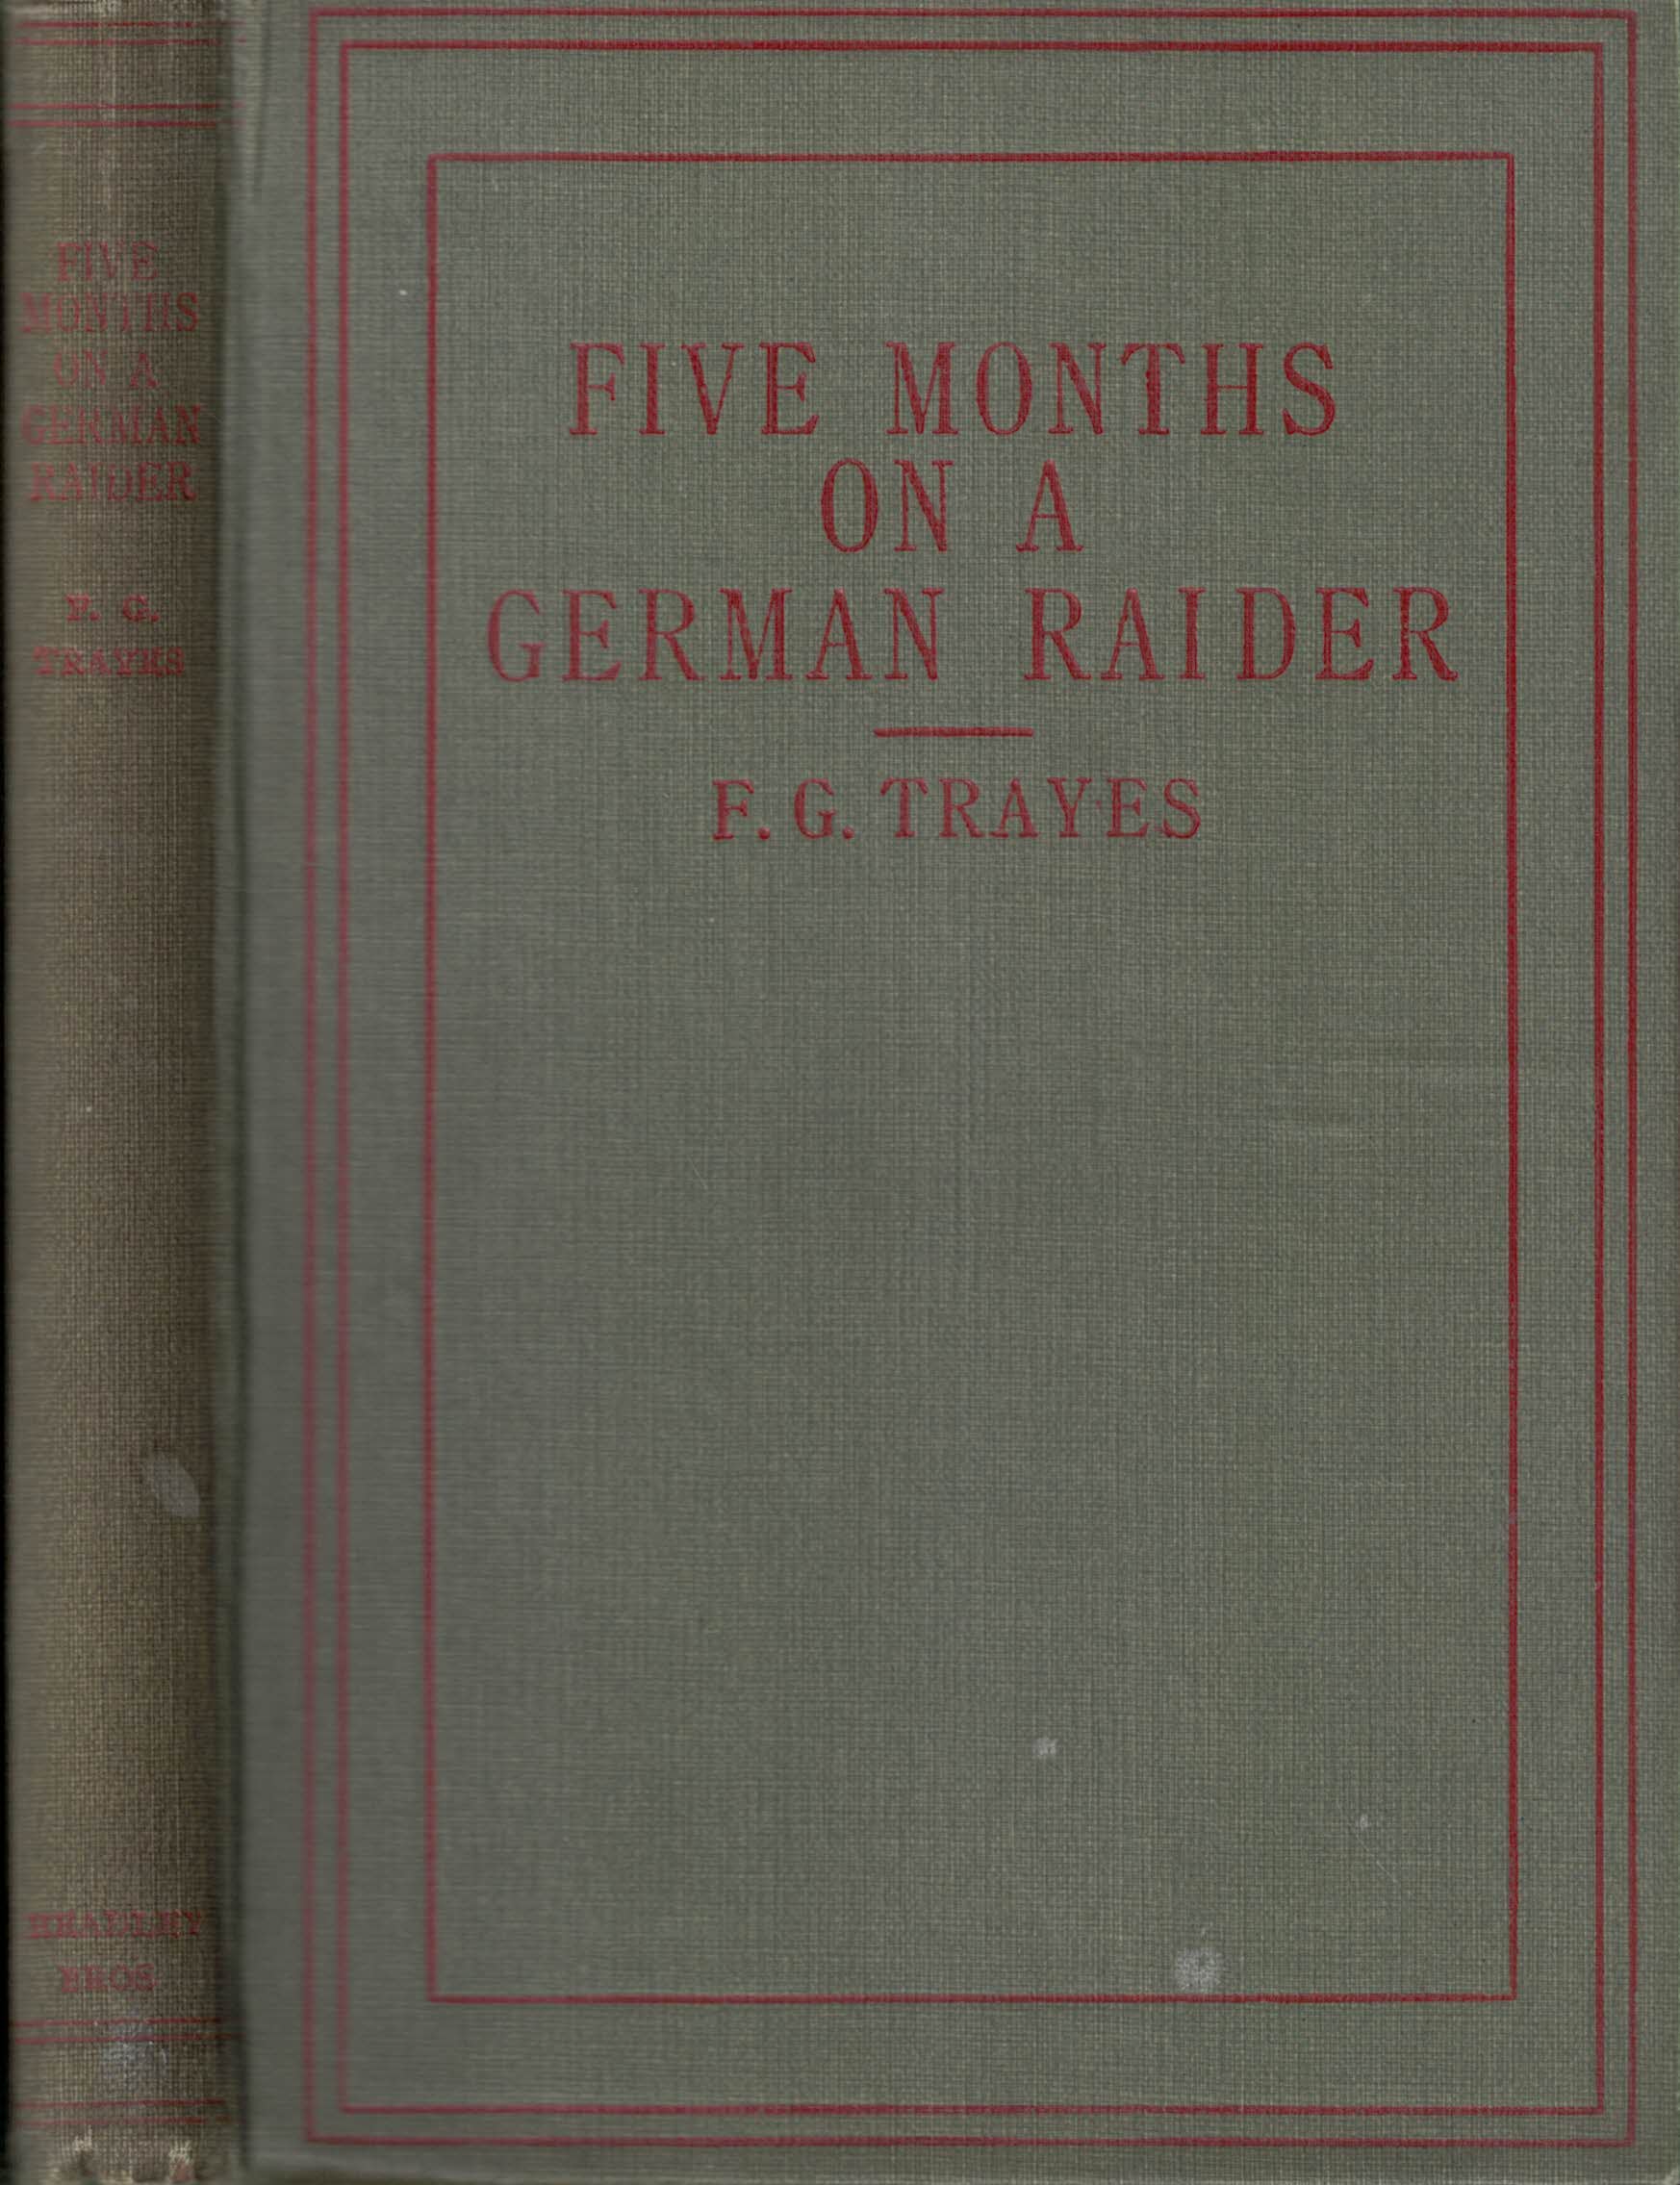 Five Months on a German Raider. Being the Adventures of an Englishman Captured by the "Wolf".